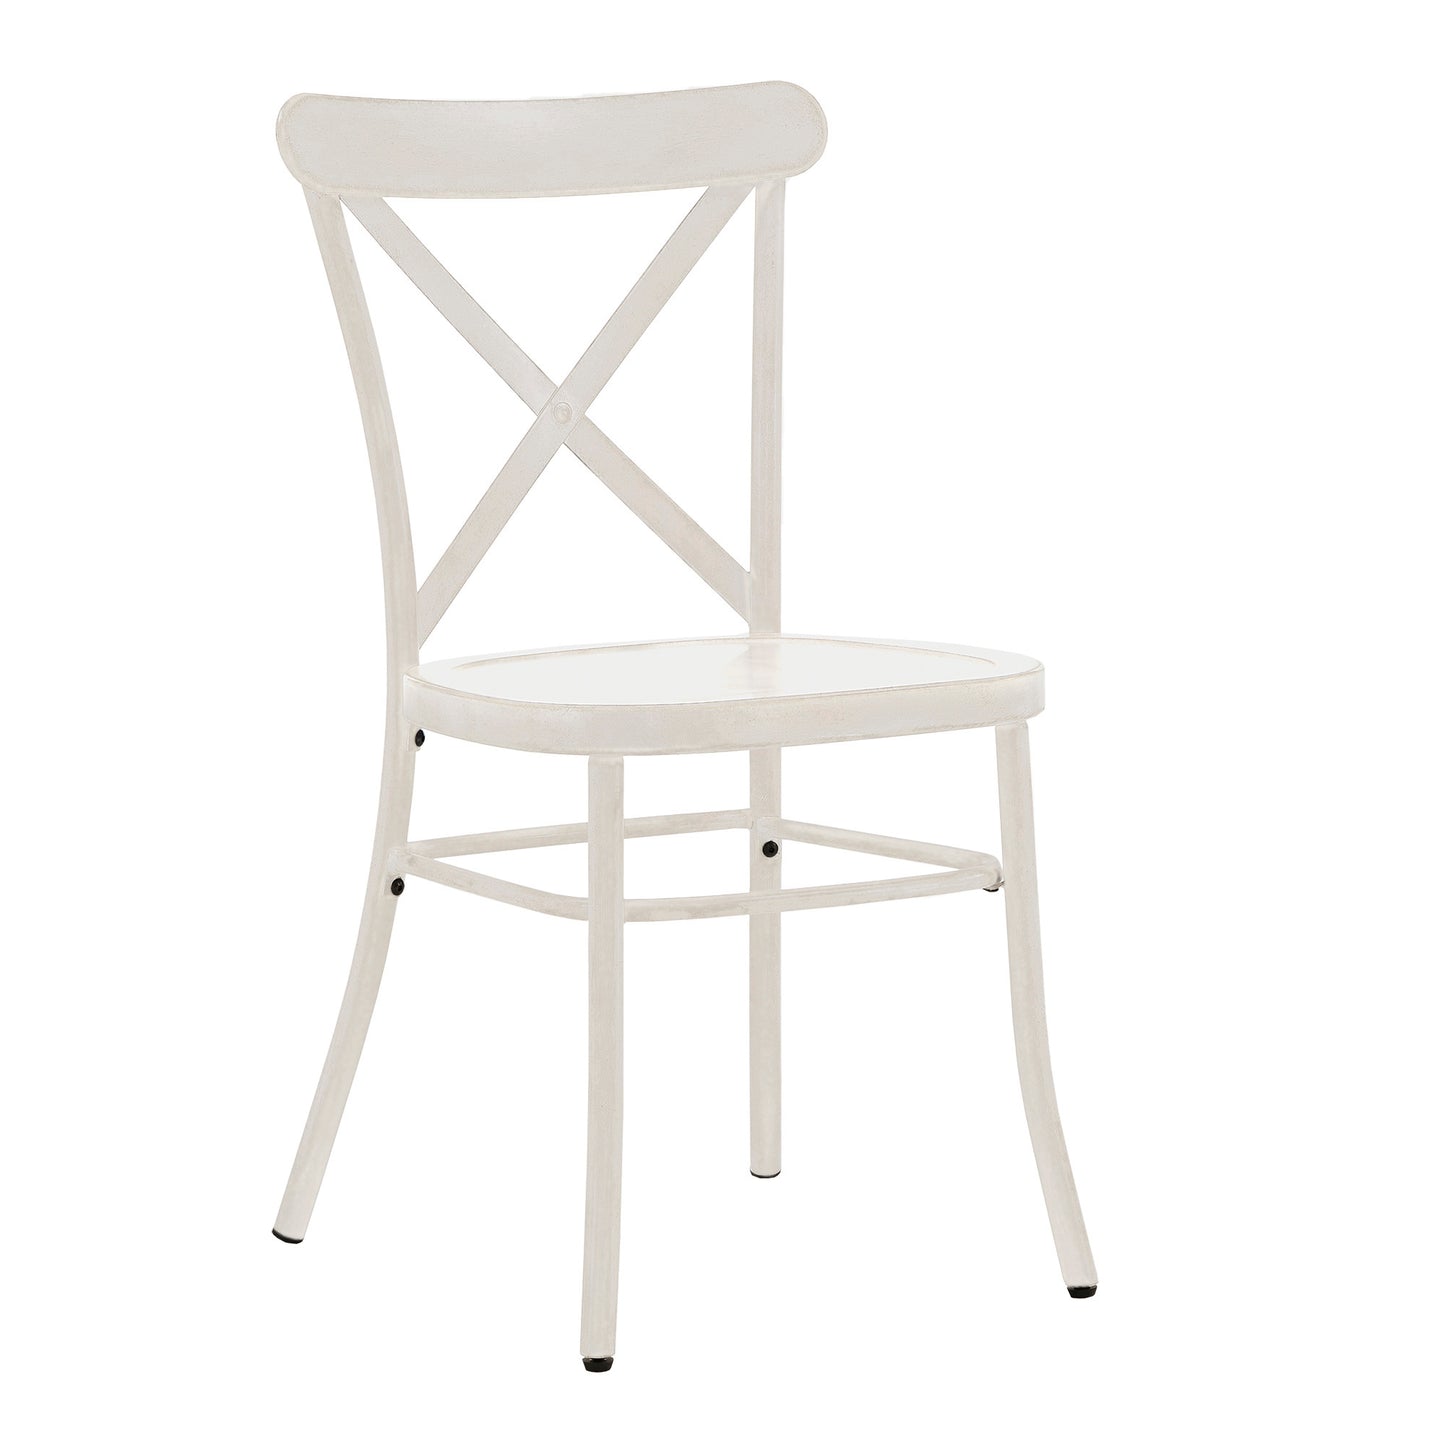 Metal Dining Chairs (Set of 2) - Antique White Finish